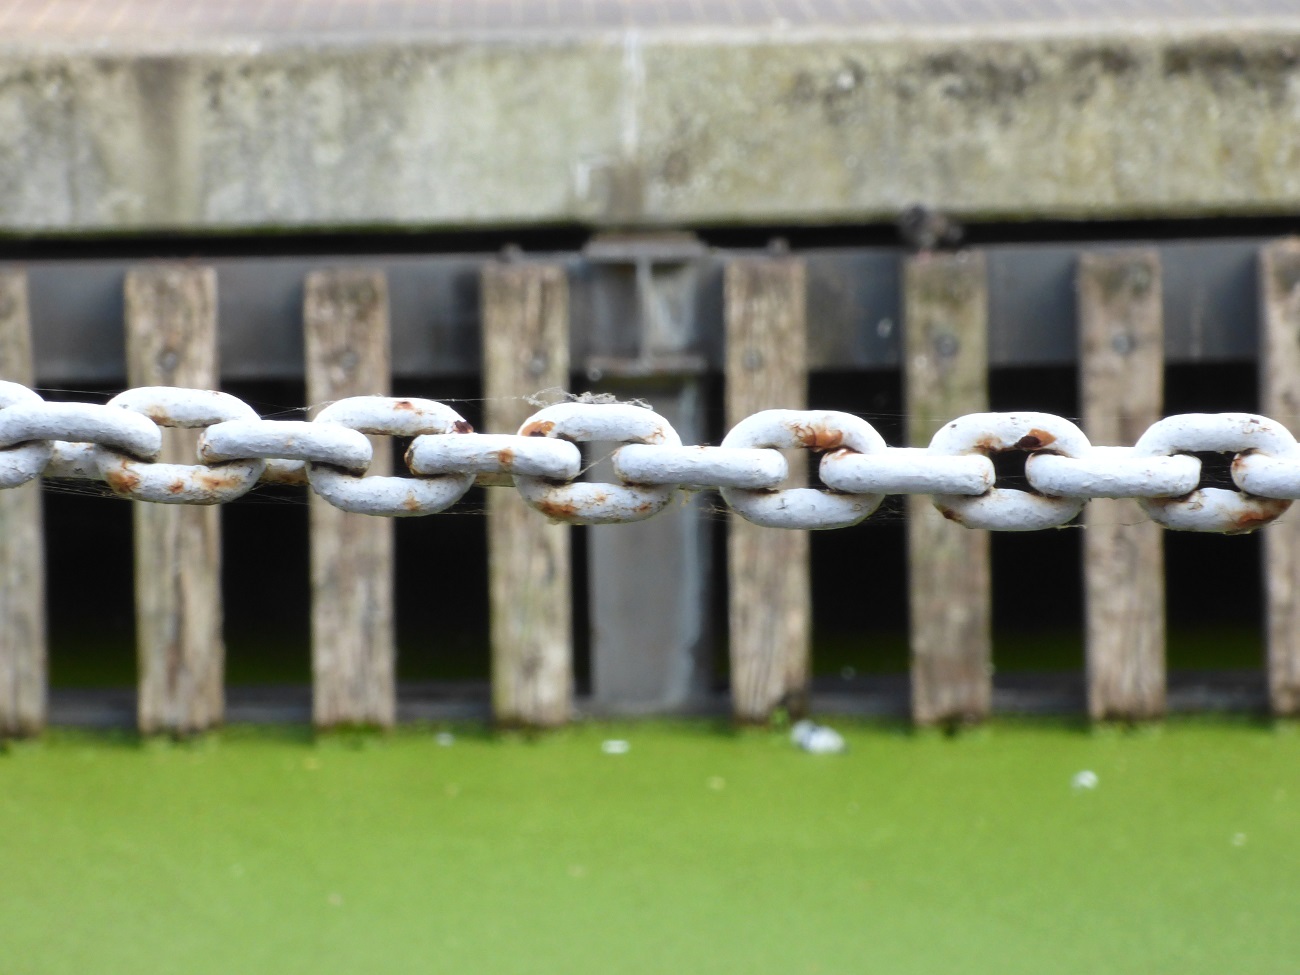 20160816_Tower-Hamlets_Limehouse-Basin_Chained